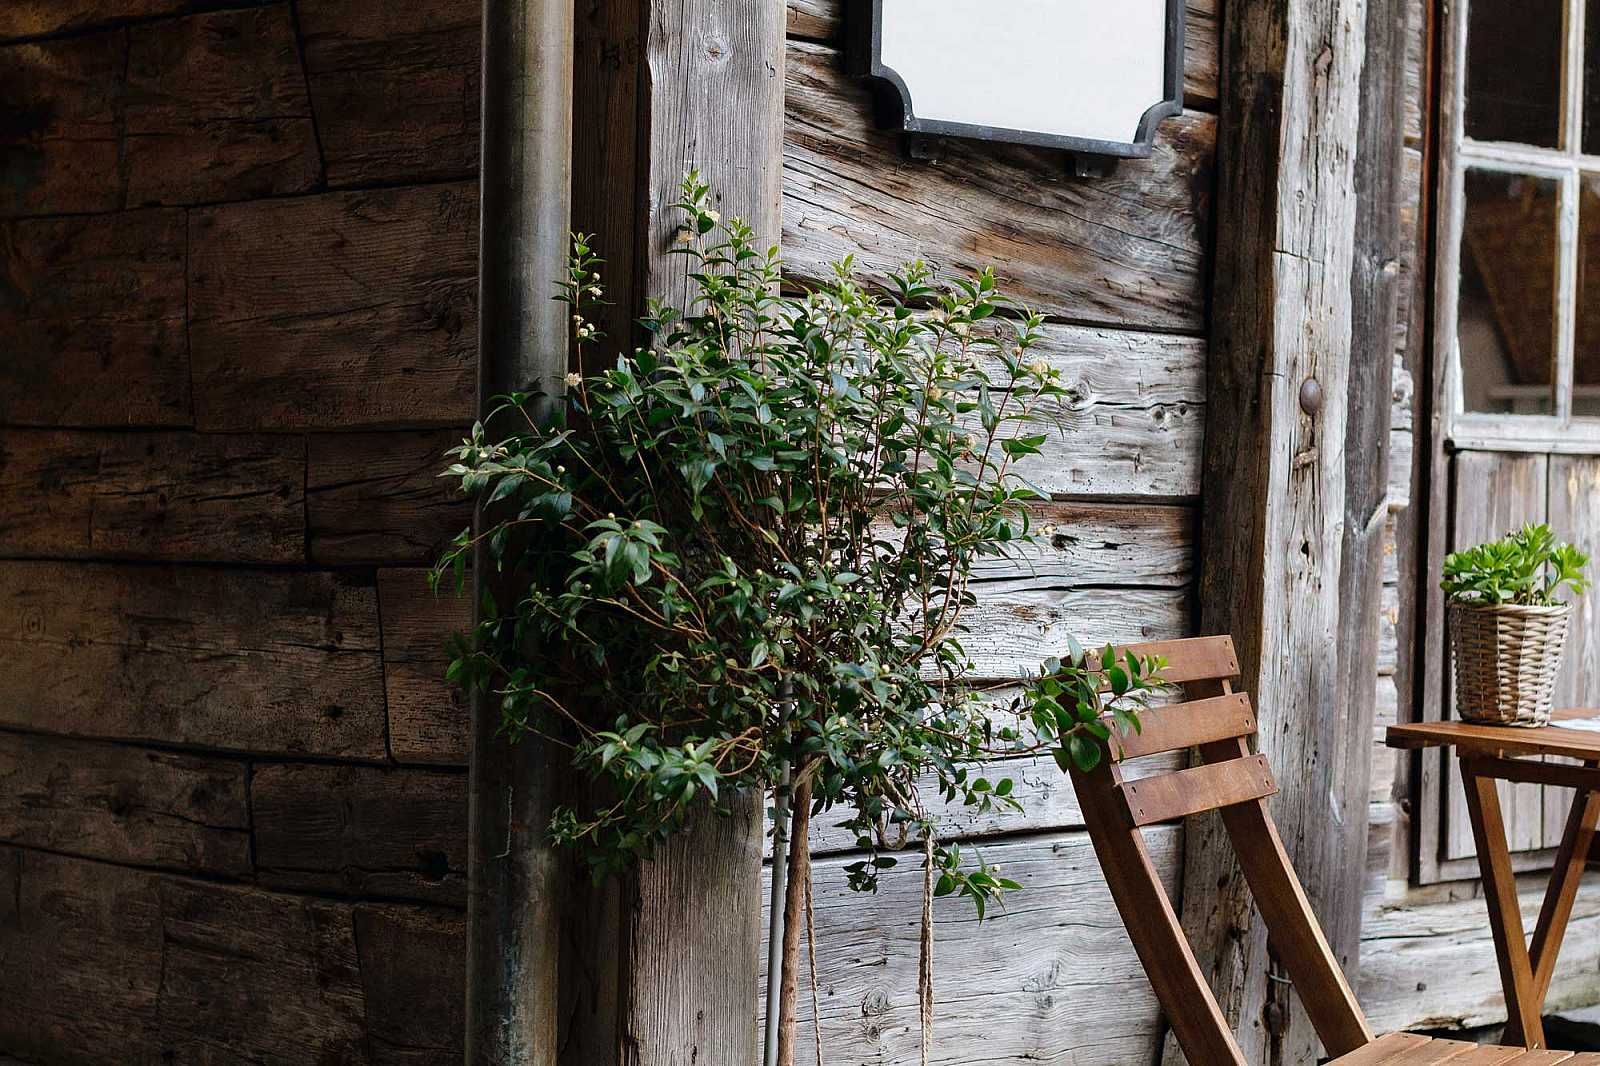 A wooden chair is sitting in front of a wooden wall.